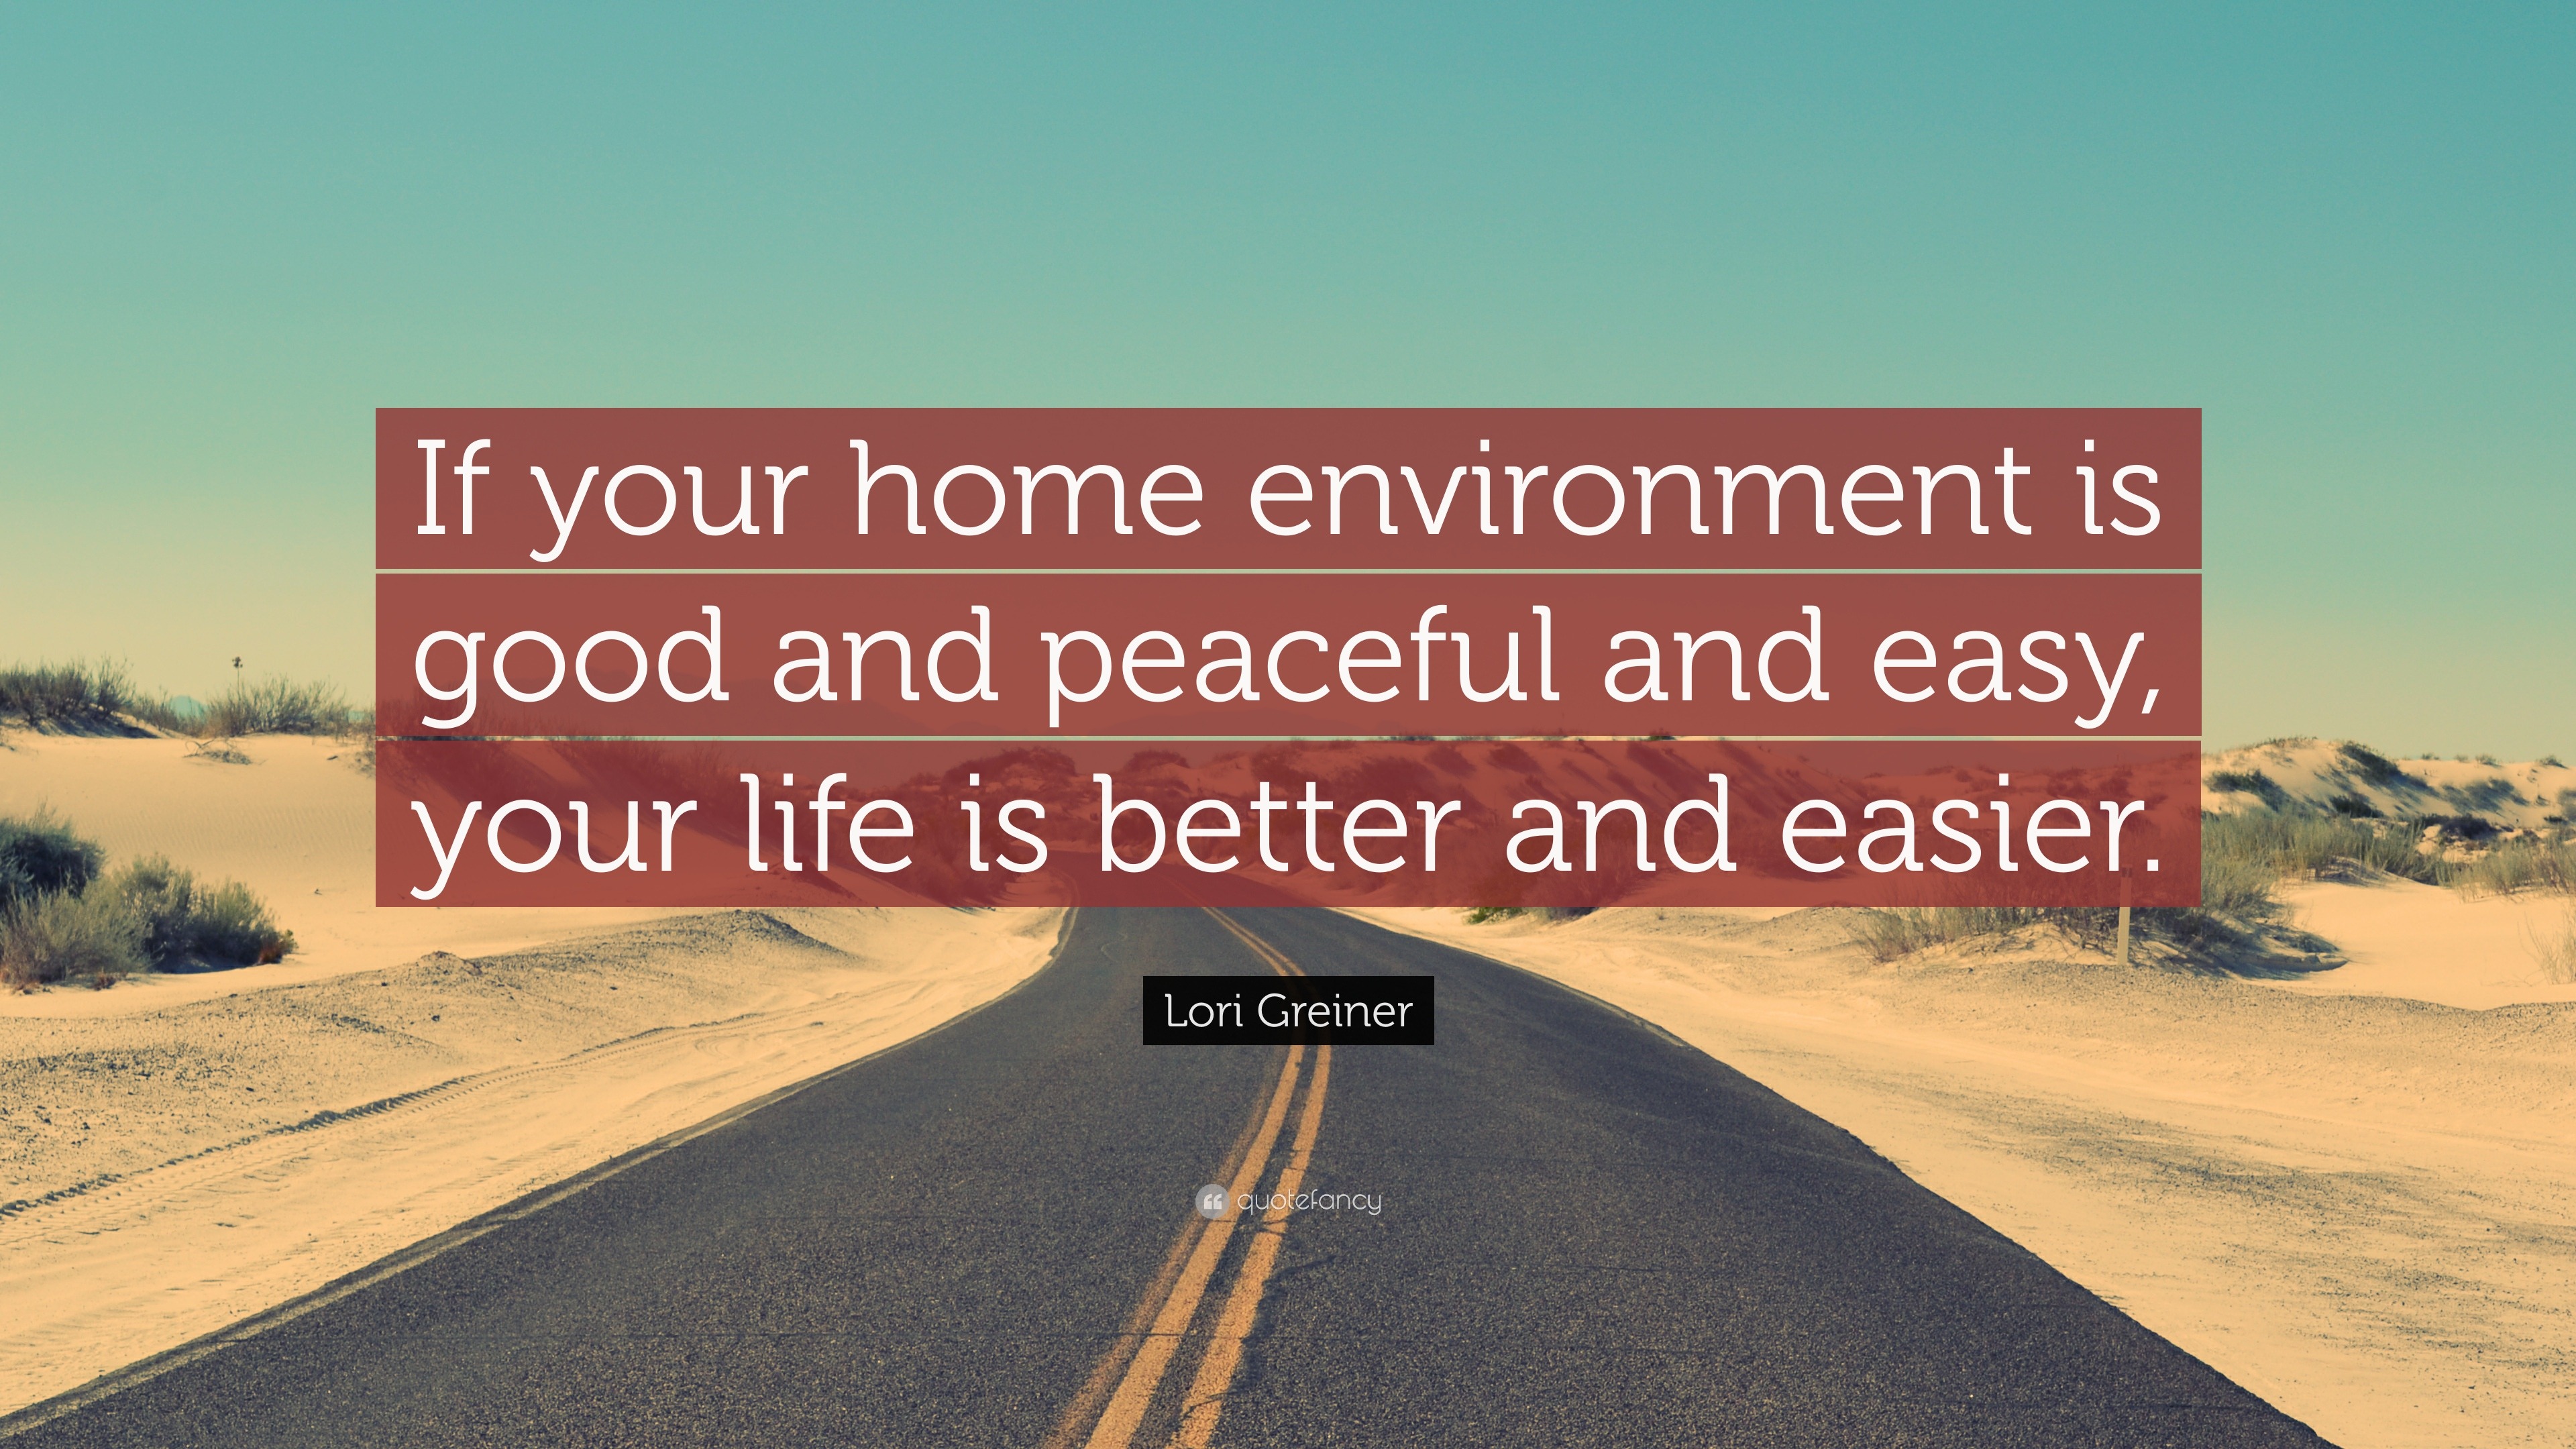 Lori Greiner Quote: “If your home environment is good and peaceful and